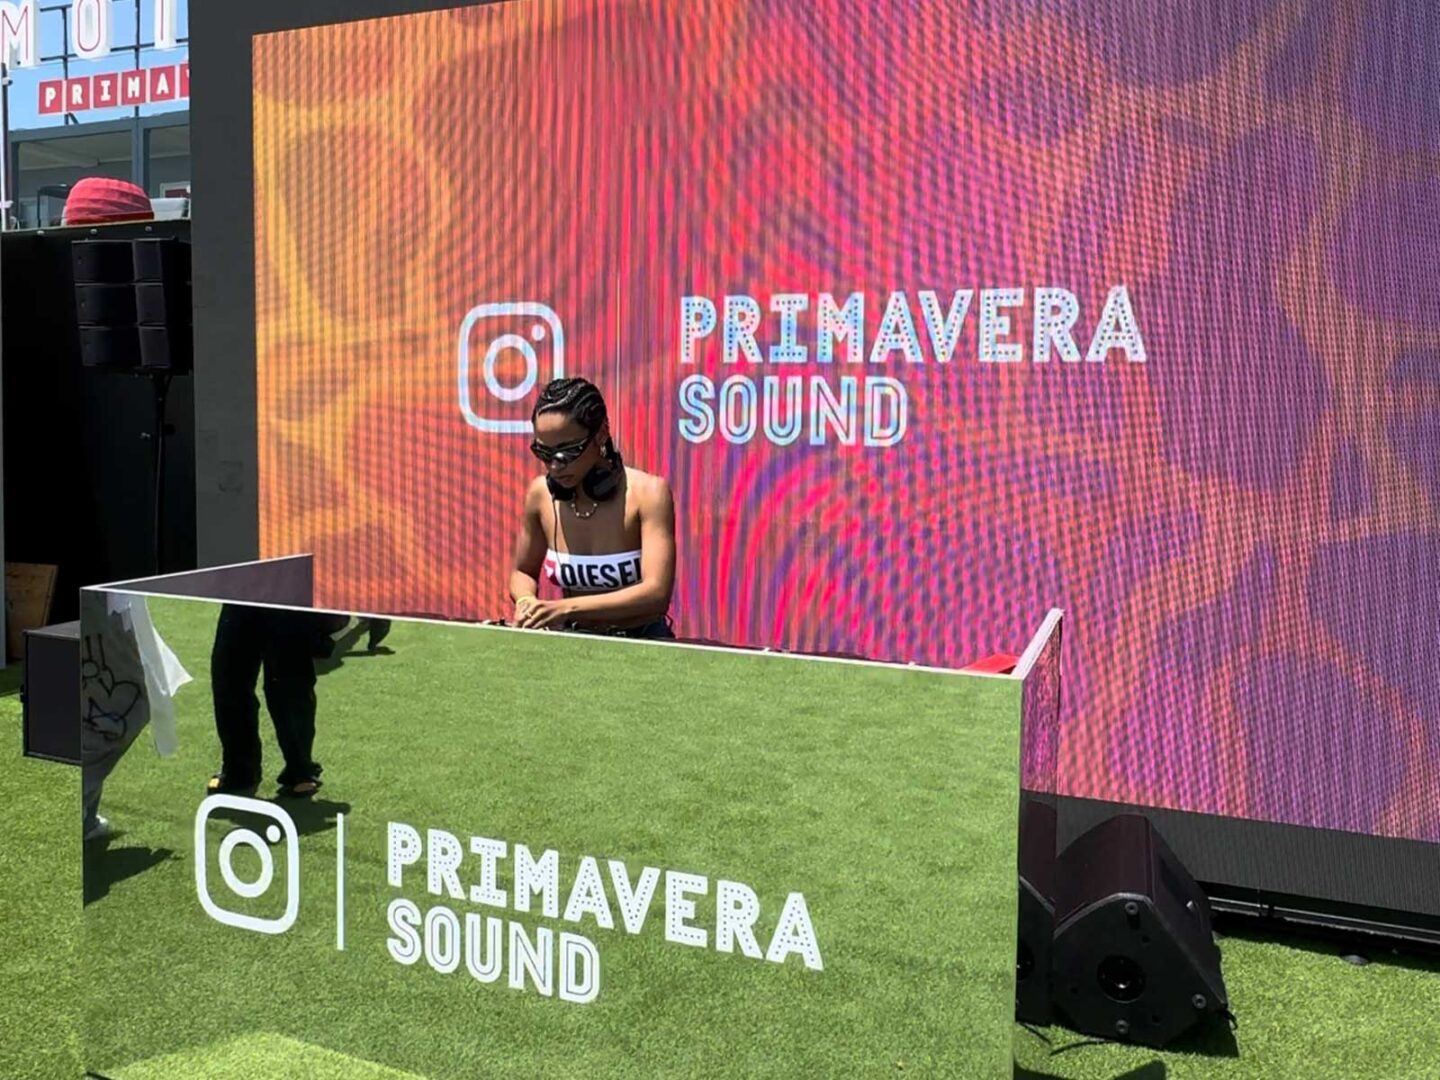 This is what the Instagram Pool Party was like at Primavera Sound